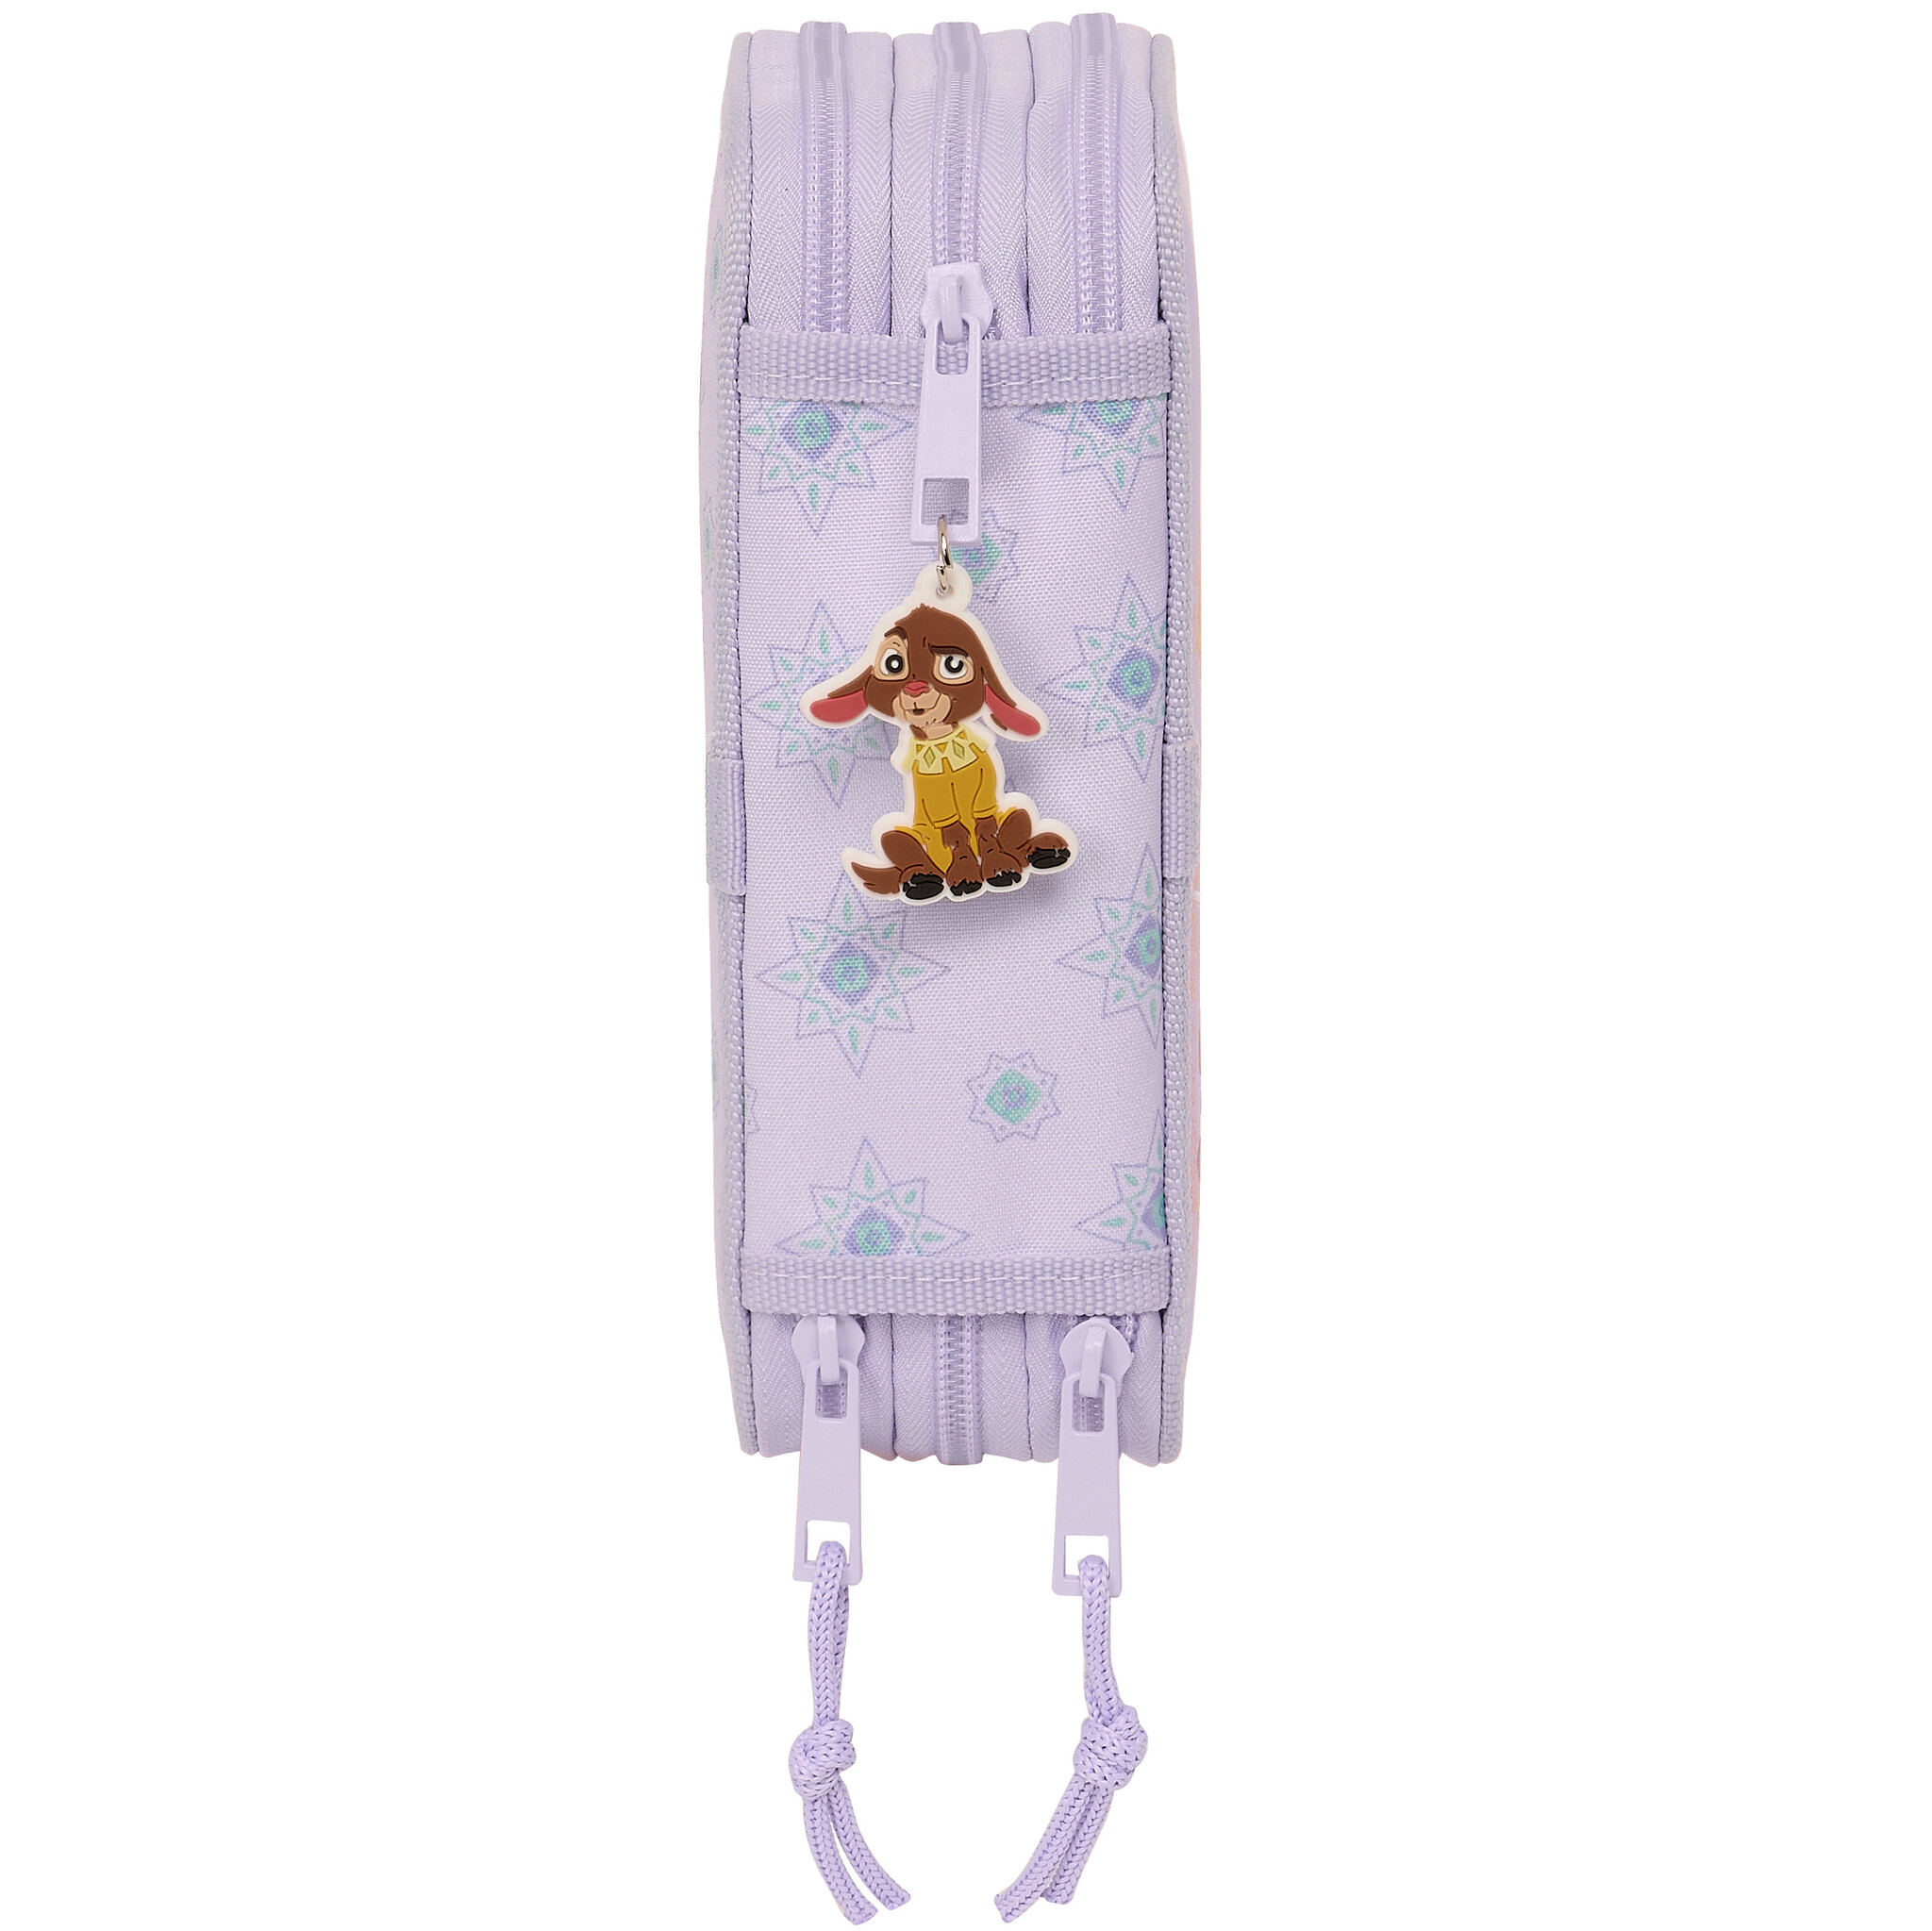 Disney Wish Filled Pouch, Rosas - 36 pieces - 19.5 x 12.5 x 5.5 cm - Polyester